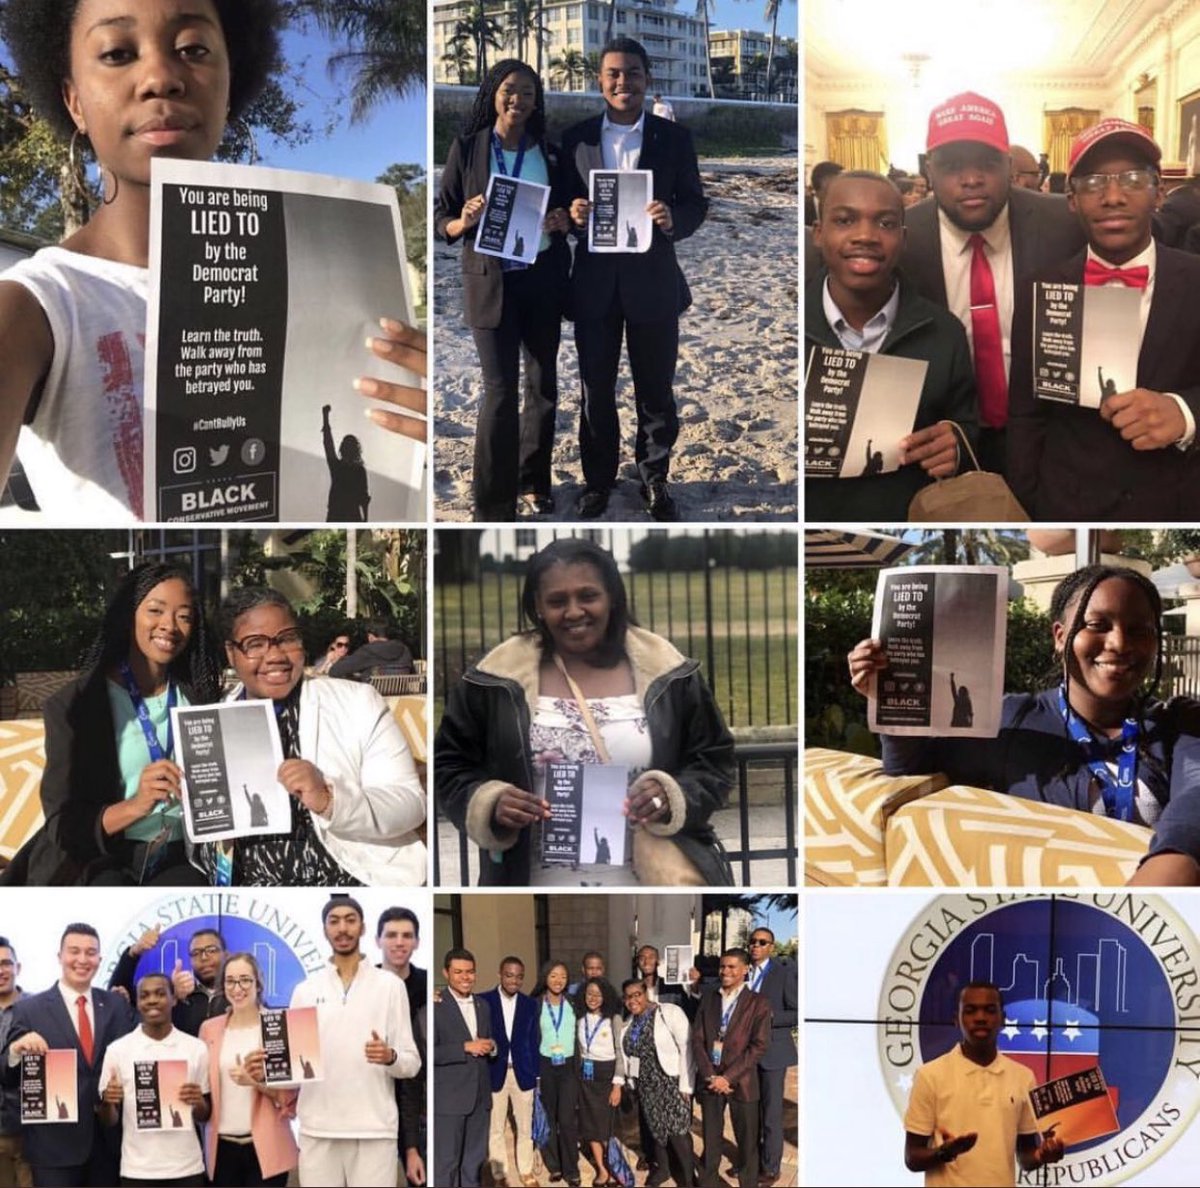 It’s been an incredible journey. We are so fortunate to have had the opportunity to travel the country and educate our African-American youth on what it means to think freely. We’ve worked hard to help President Trump get re-elected and expand black GOP. Vote Trump!